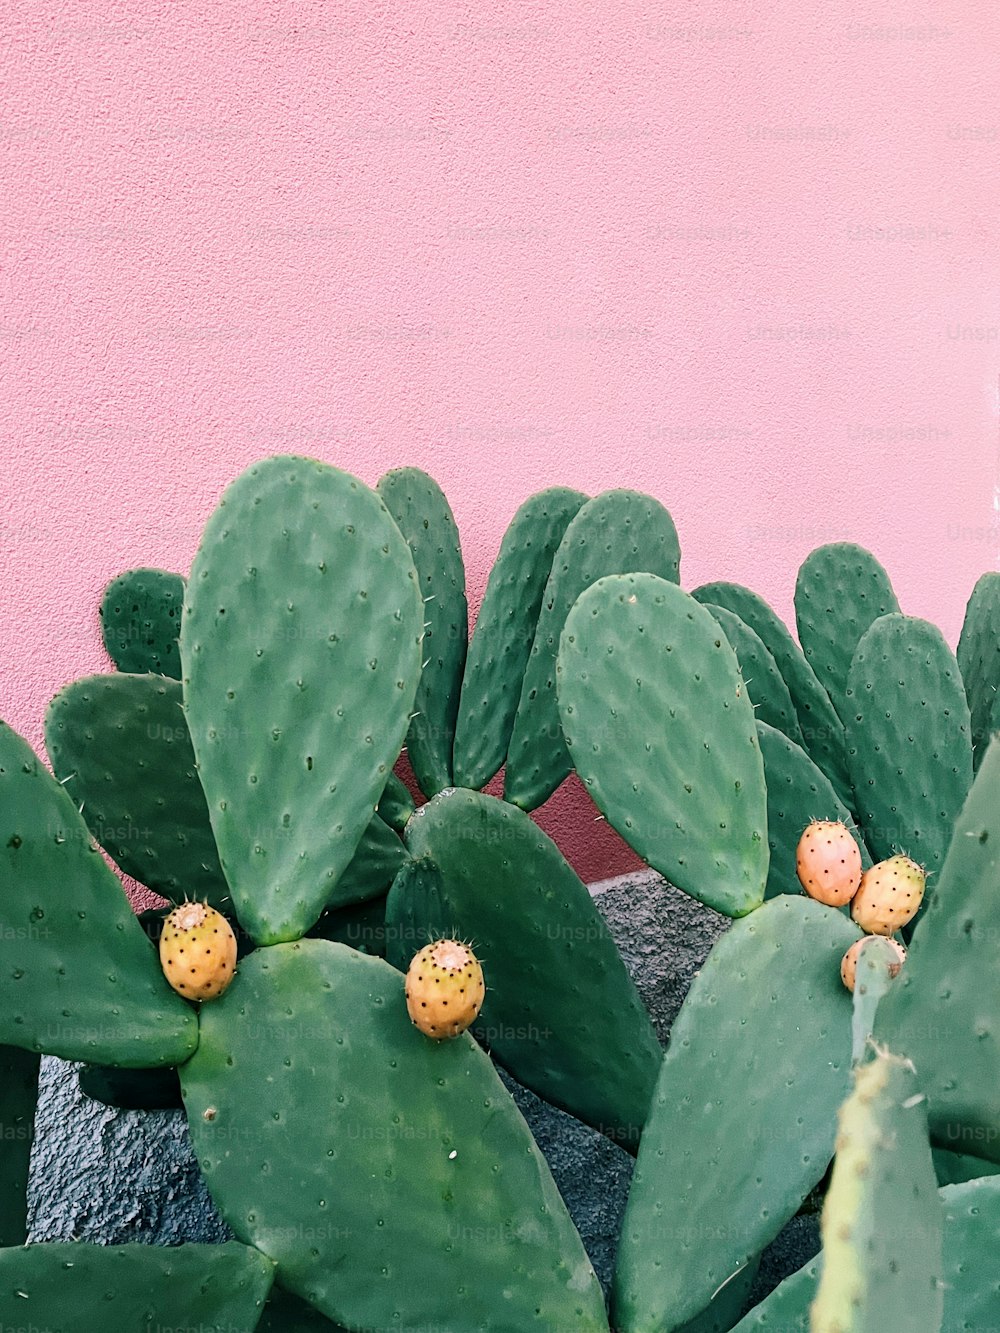 Prickly Pear Cactus Pictures | Download Free Images on Unsplash